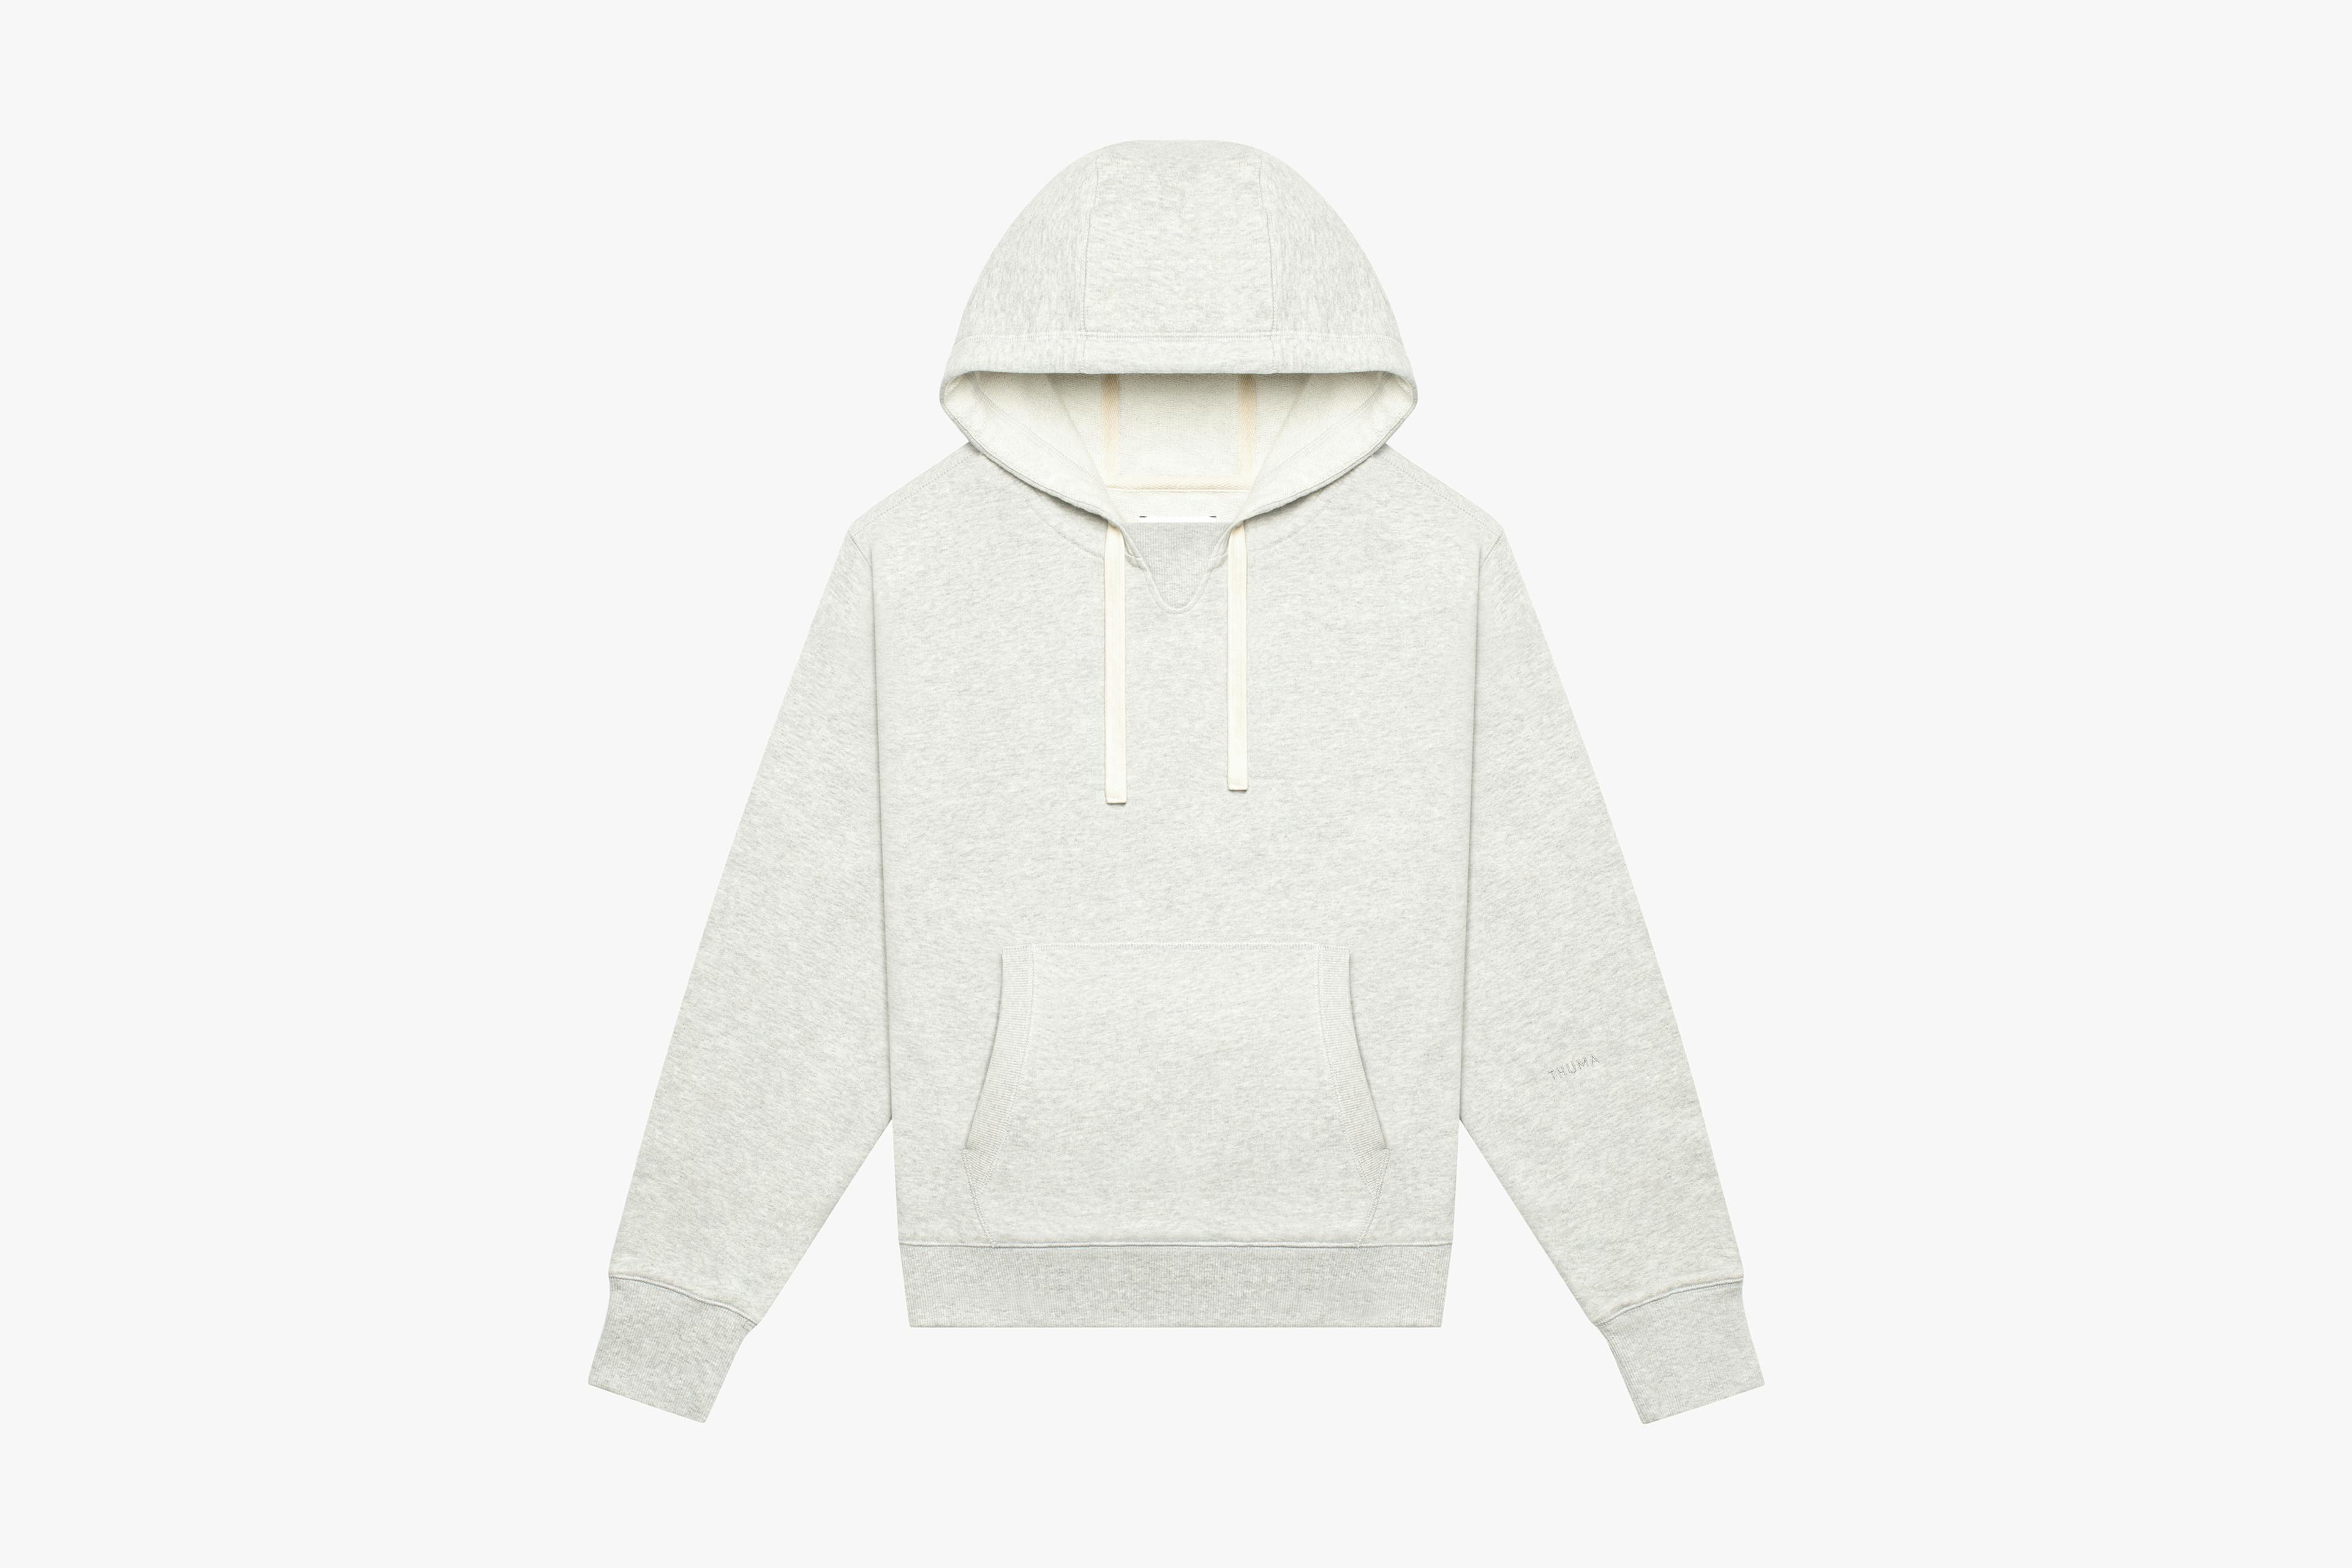 Lounge Leisure Hoodie in Oatmeal Color for Women